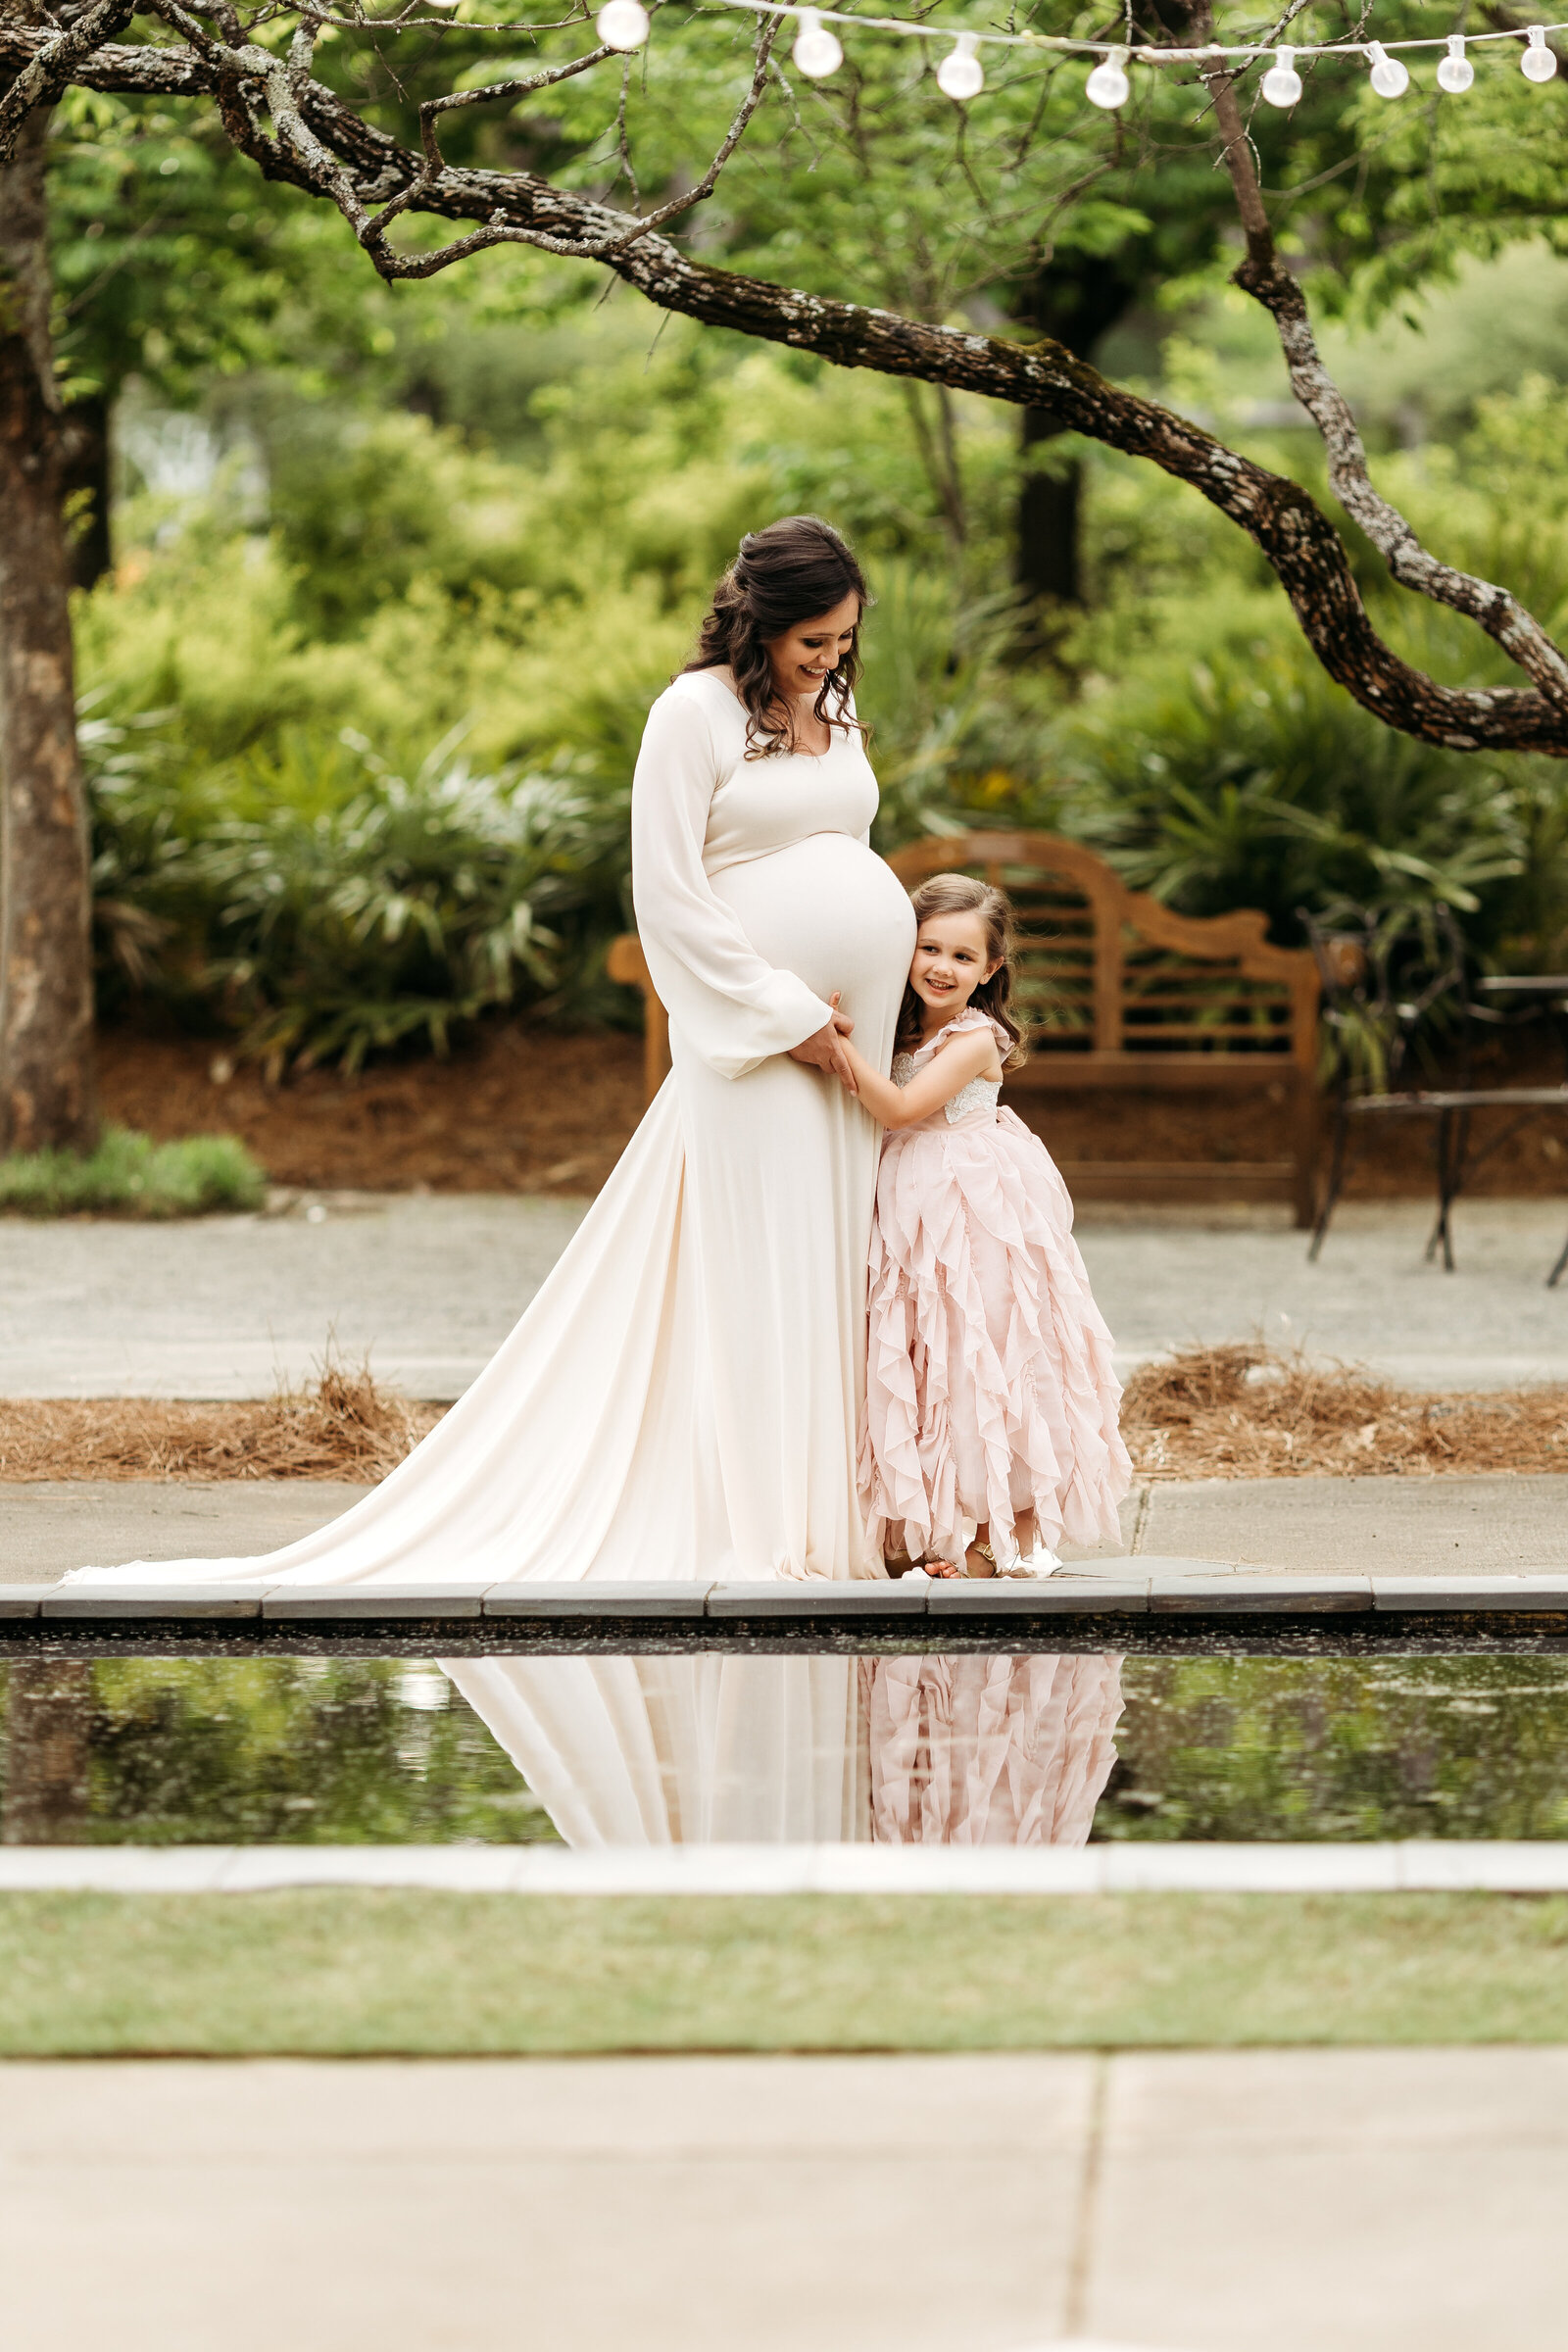 Maternity Session at the Botanical Gardens in Birmingham, AL